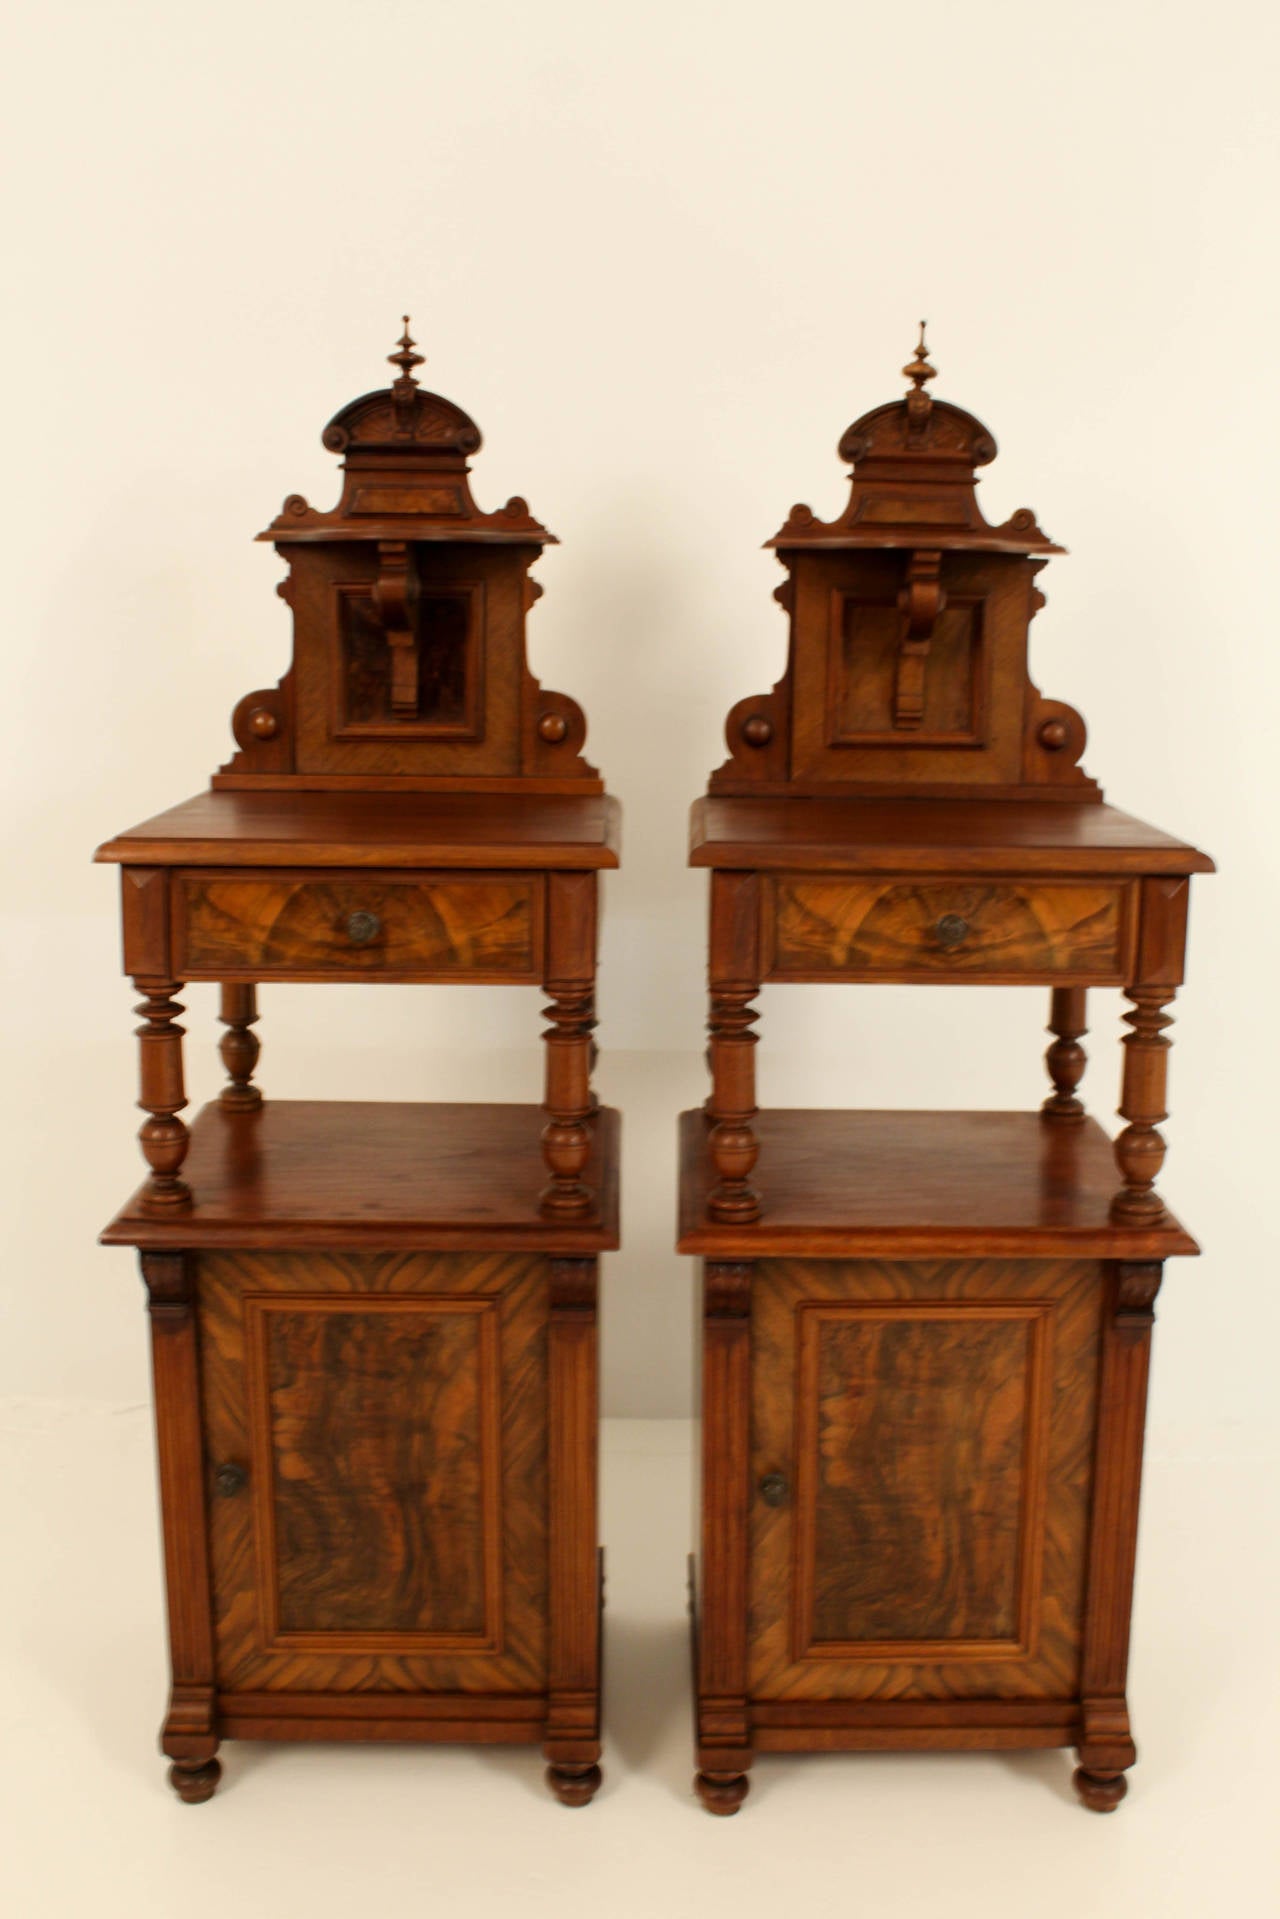 Beautiful pair of walnut Victorian nightstands with original brass knobs on drawers and doors.
In good original condition with minor wear consistent with age and use,preserving a beautiful patina.